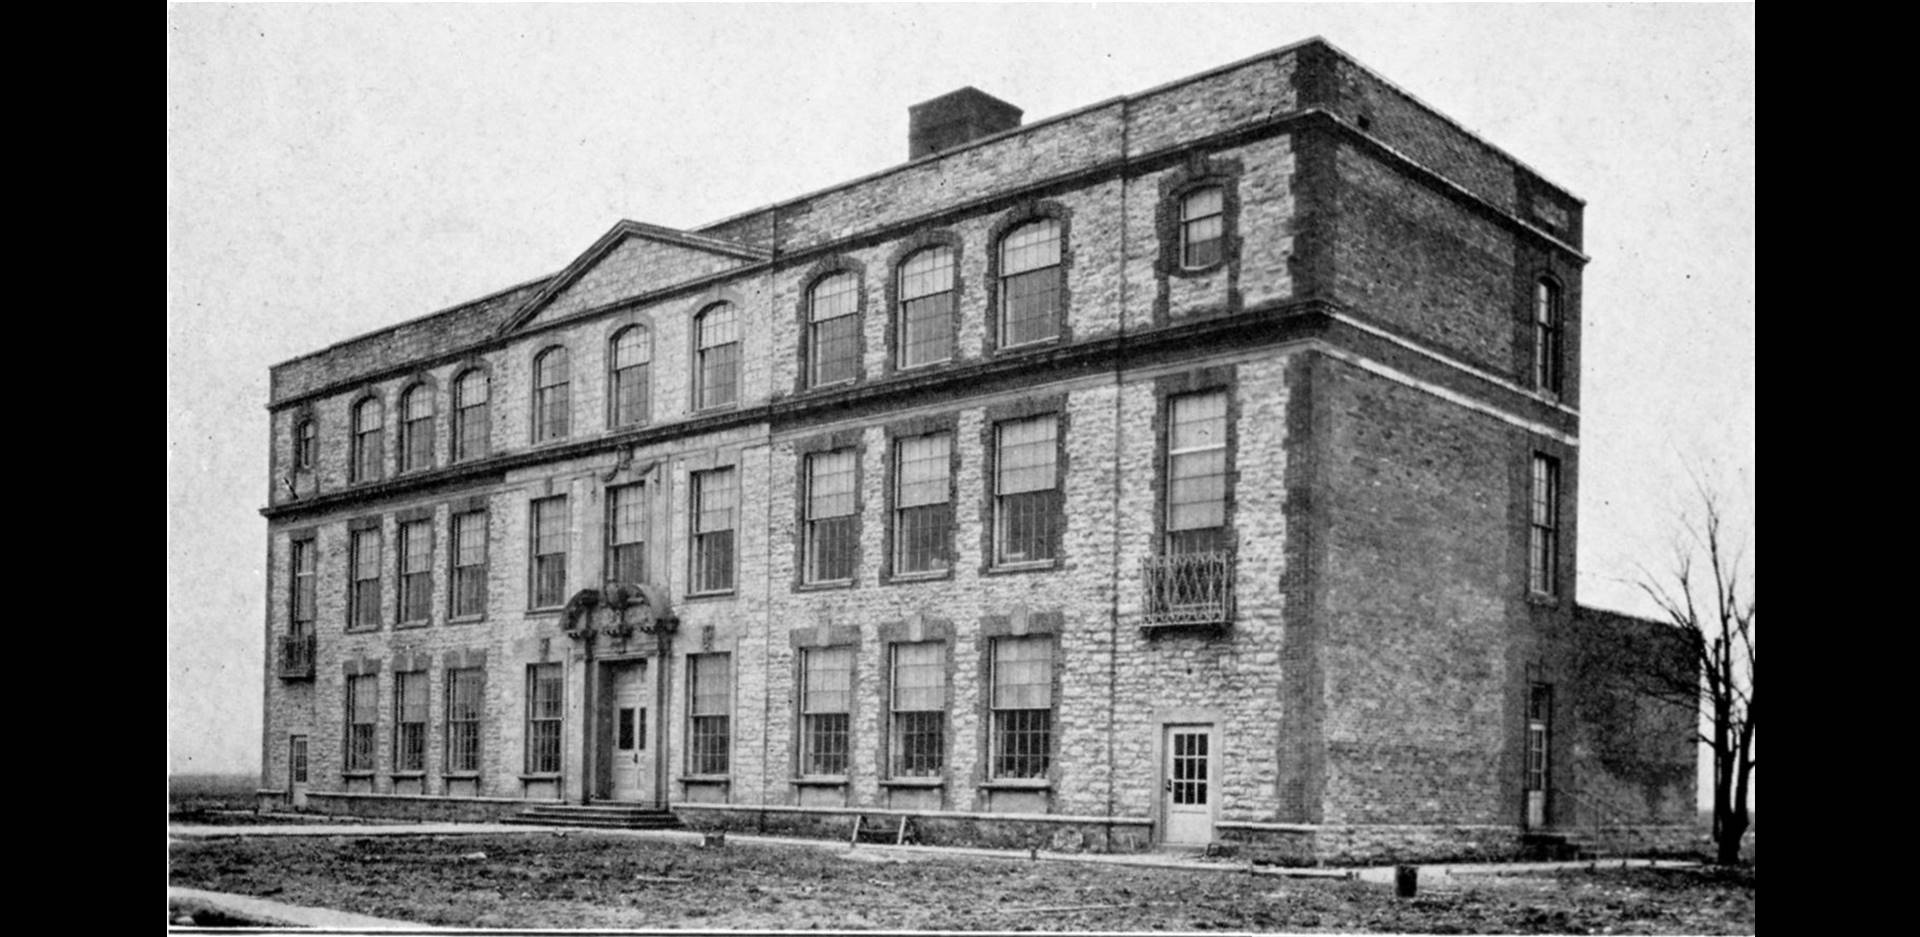 A black and white image of Jones Middle School in 1924